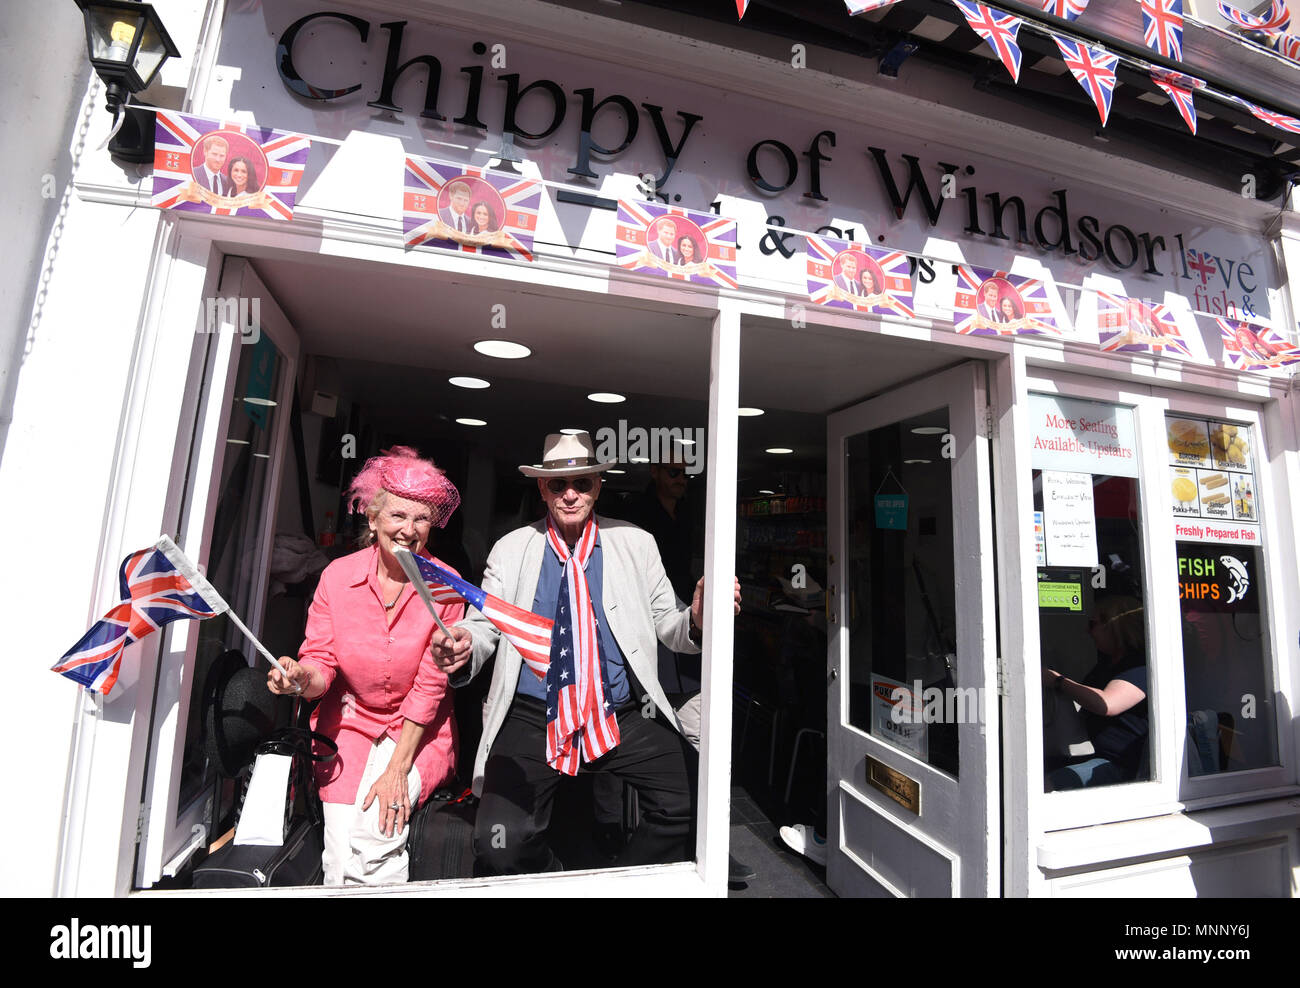 Photo Must Be Credited ©Alpha Press 079965 18/05/2018 Atmosphere around Windsor Town Centre and Windsor Castle in Berkshire the day before the Royal Wedding of Prince Harry and Meghan Markle. Stock Photo